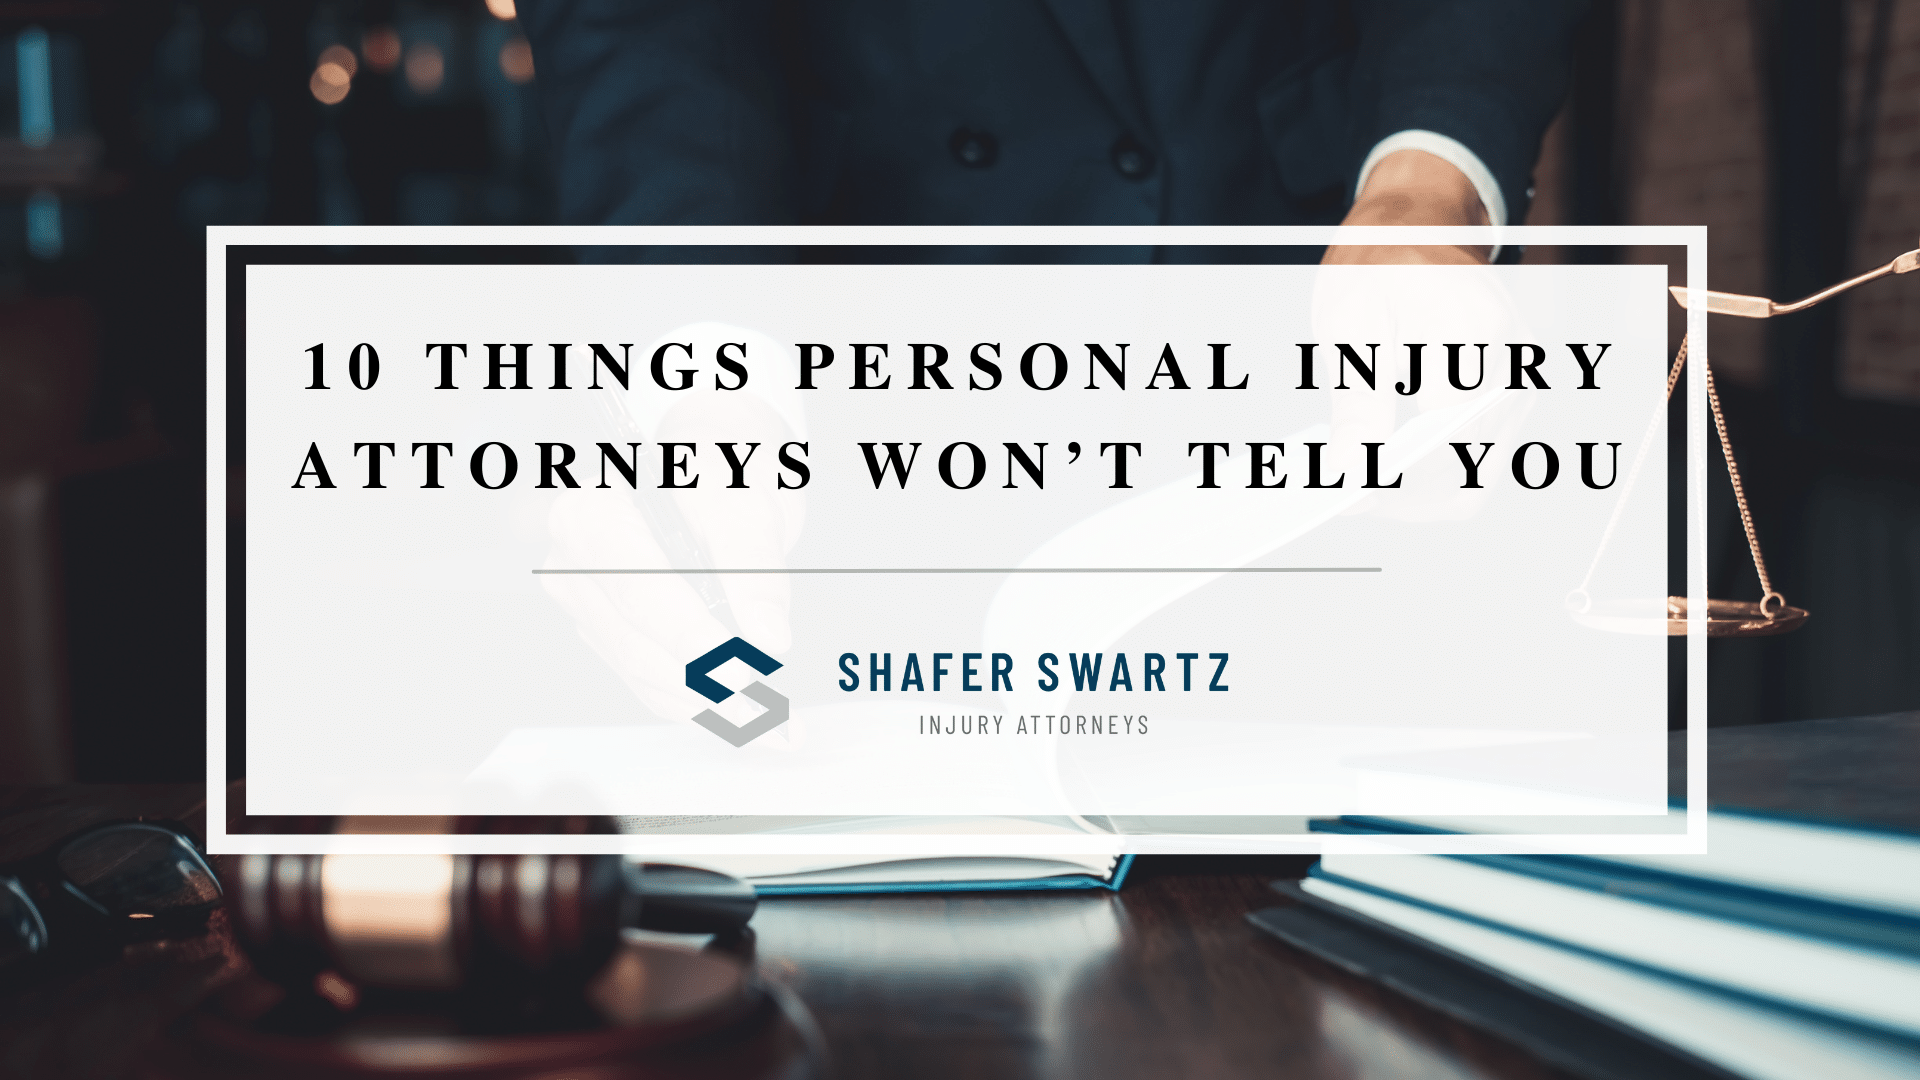 10 Things Personal Injury Attorneys Won’t Tell You